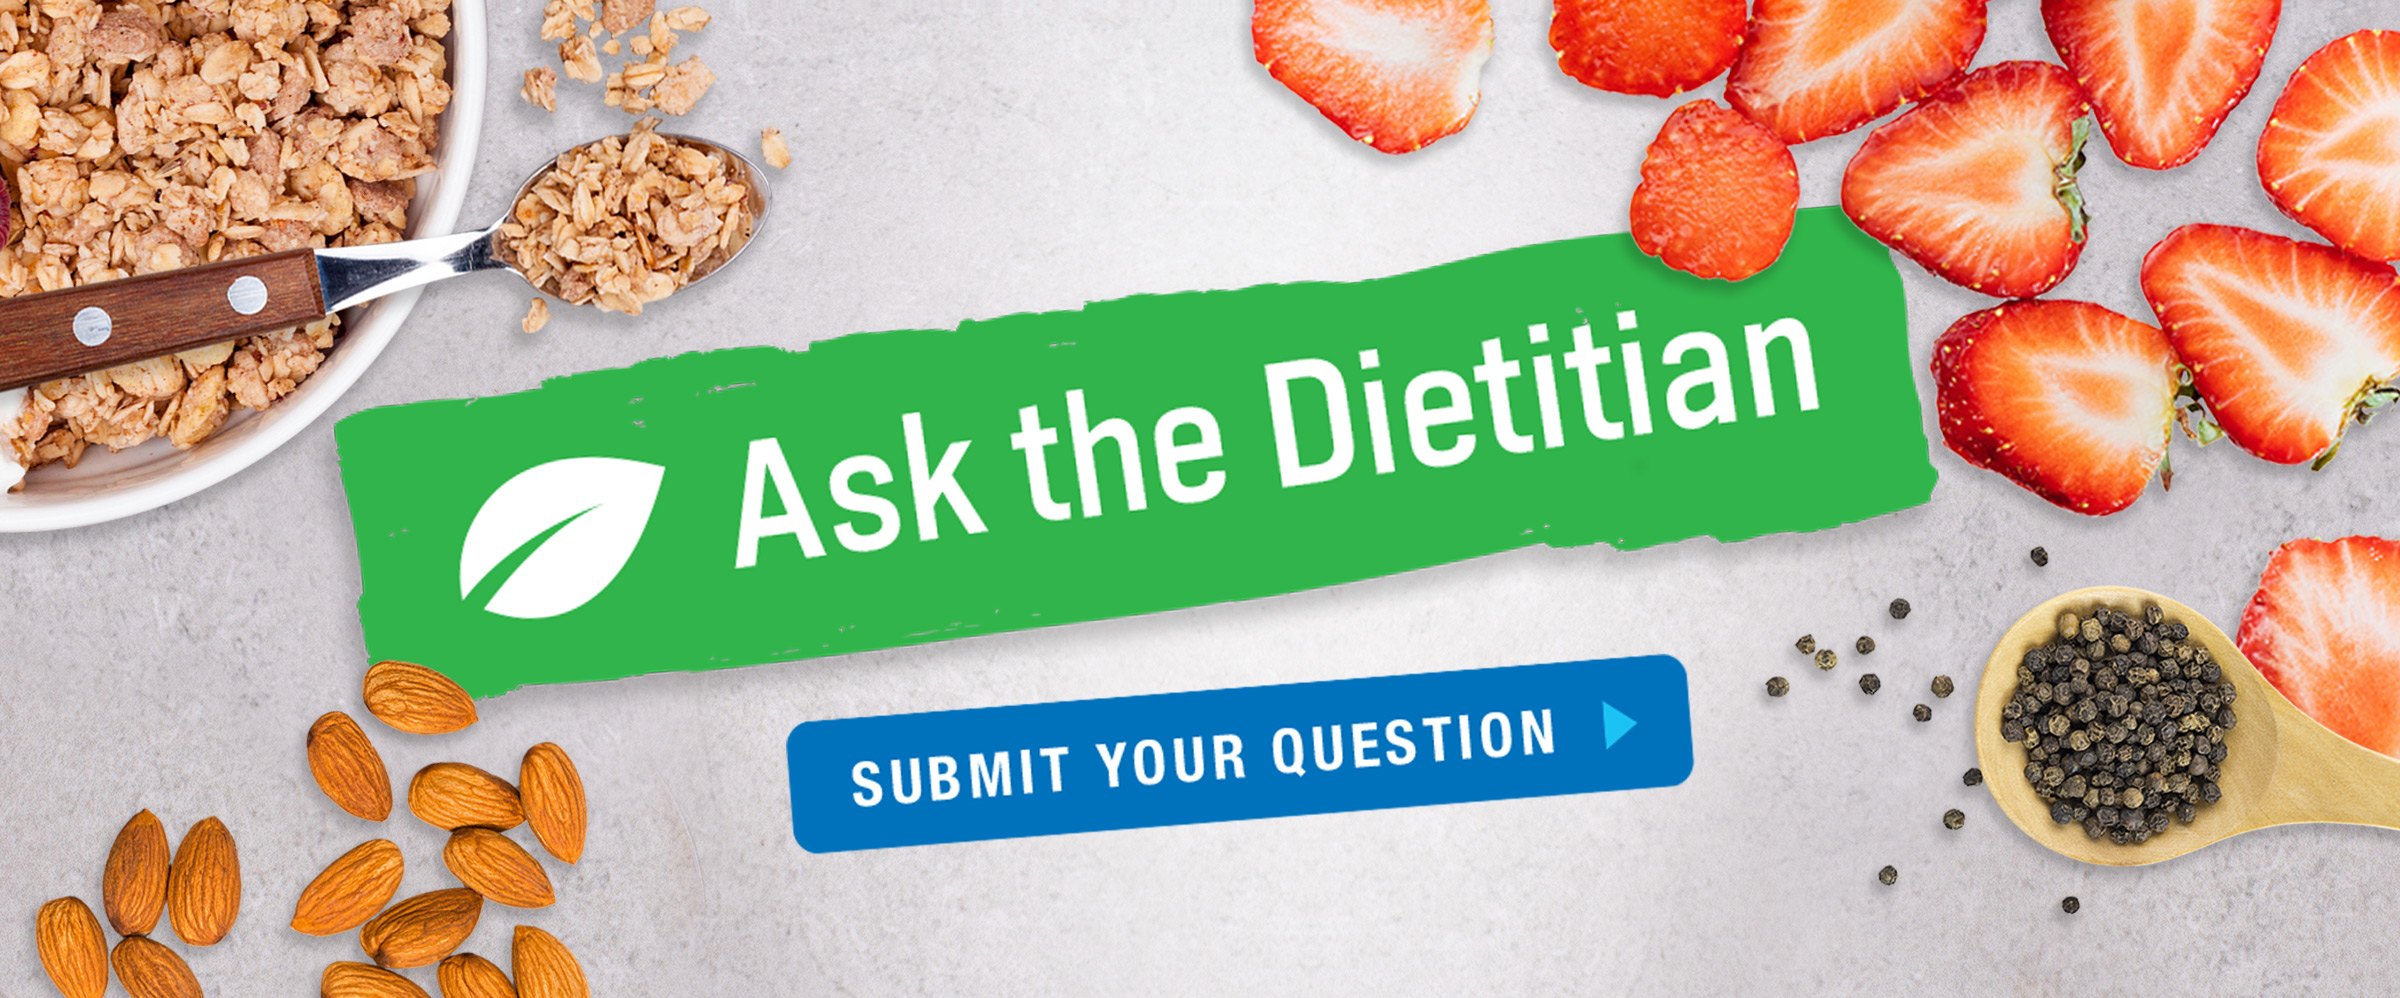 Ask the Dietitian: Submit your question.